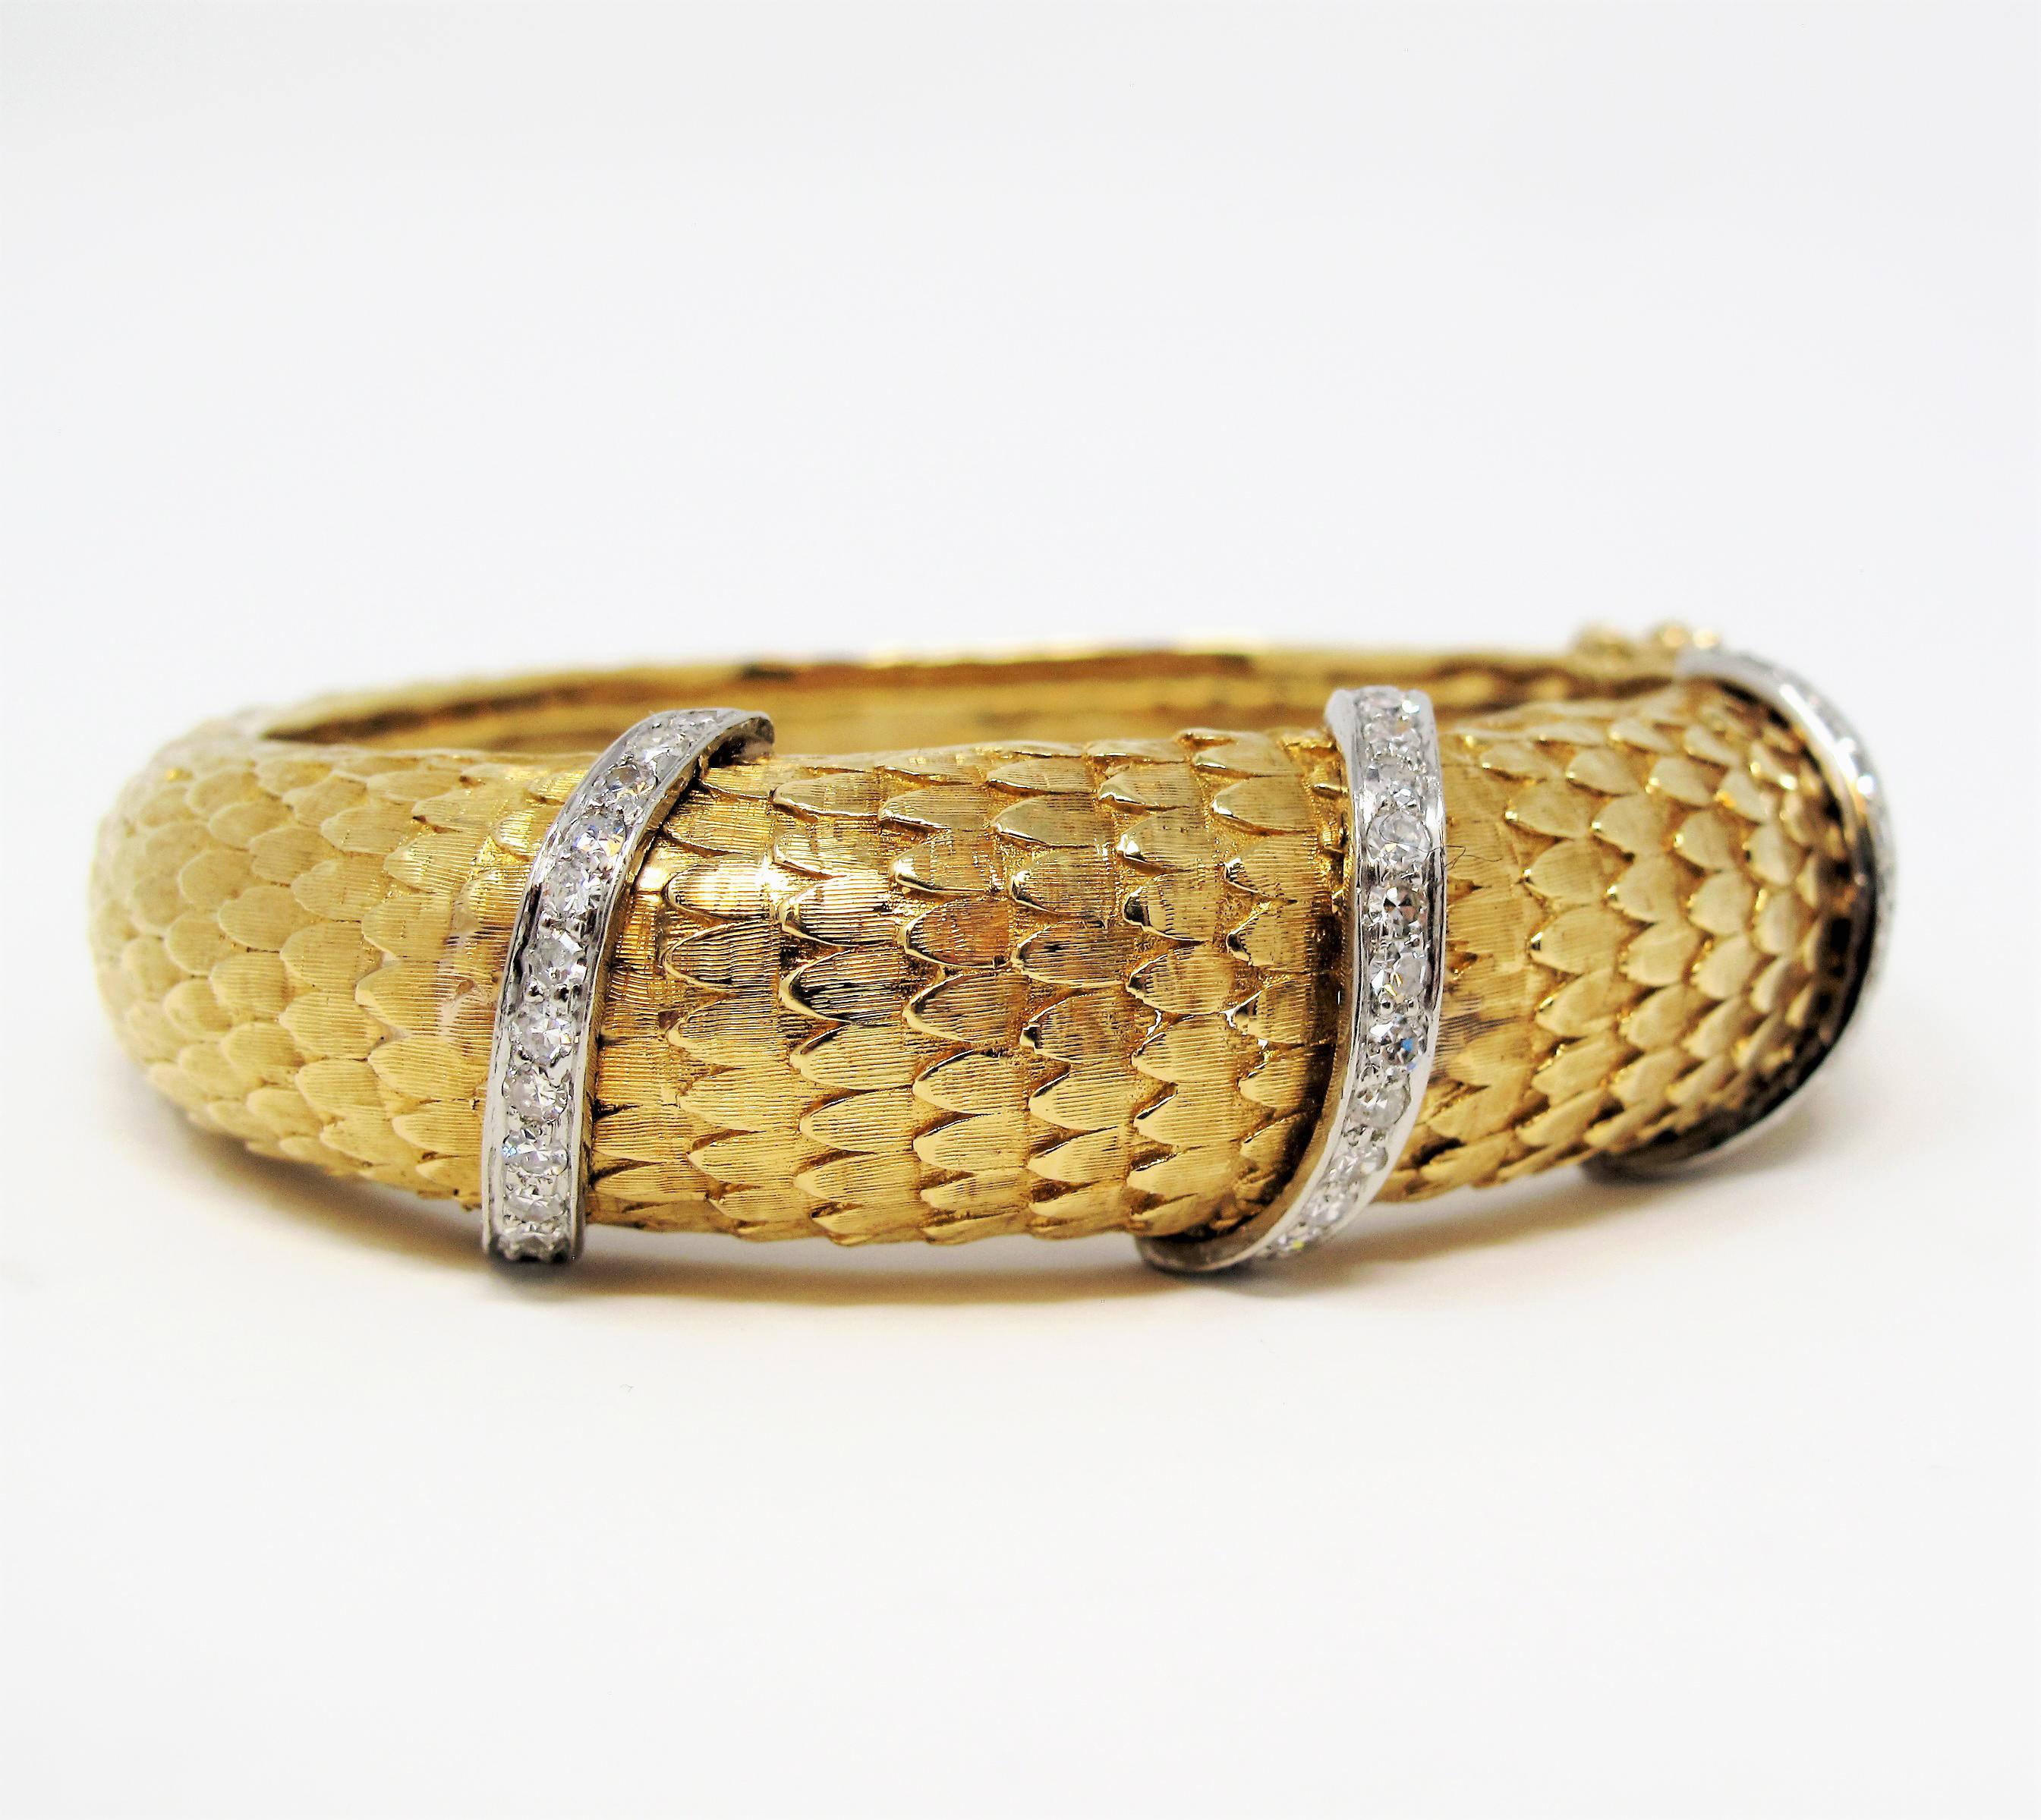 Women's Scaled Hinged Cuff Bracelet in 18 Karat Yellow Gold with Pave Diamond Wraps